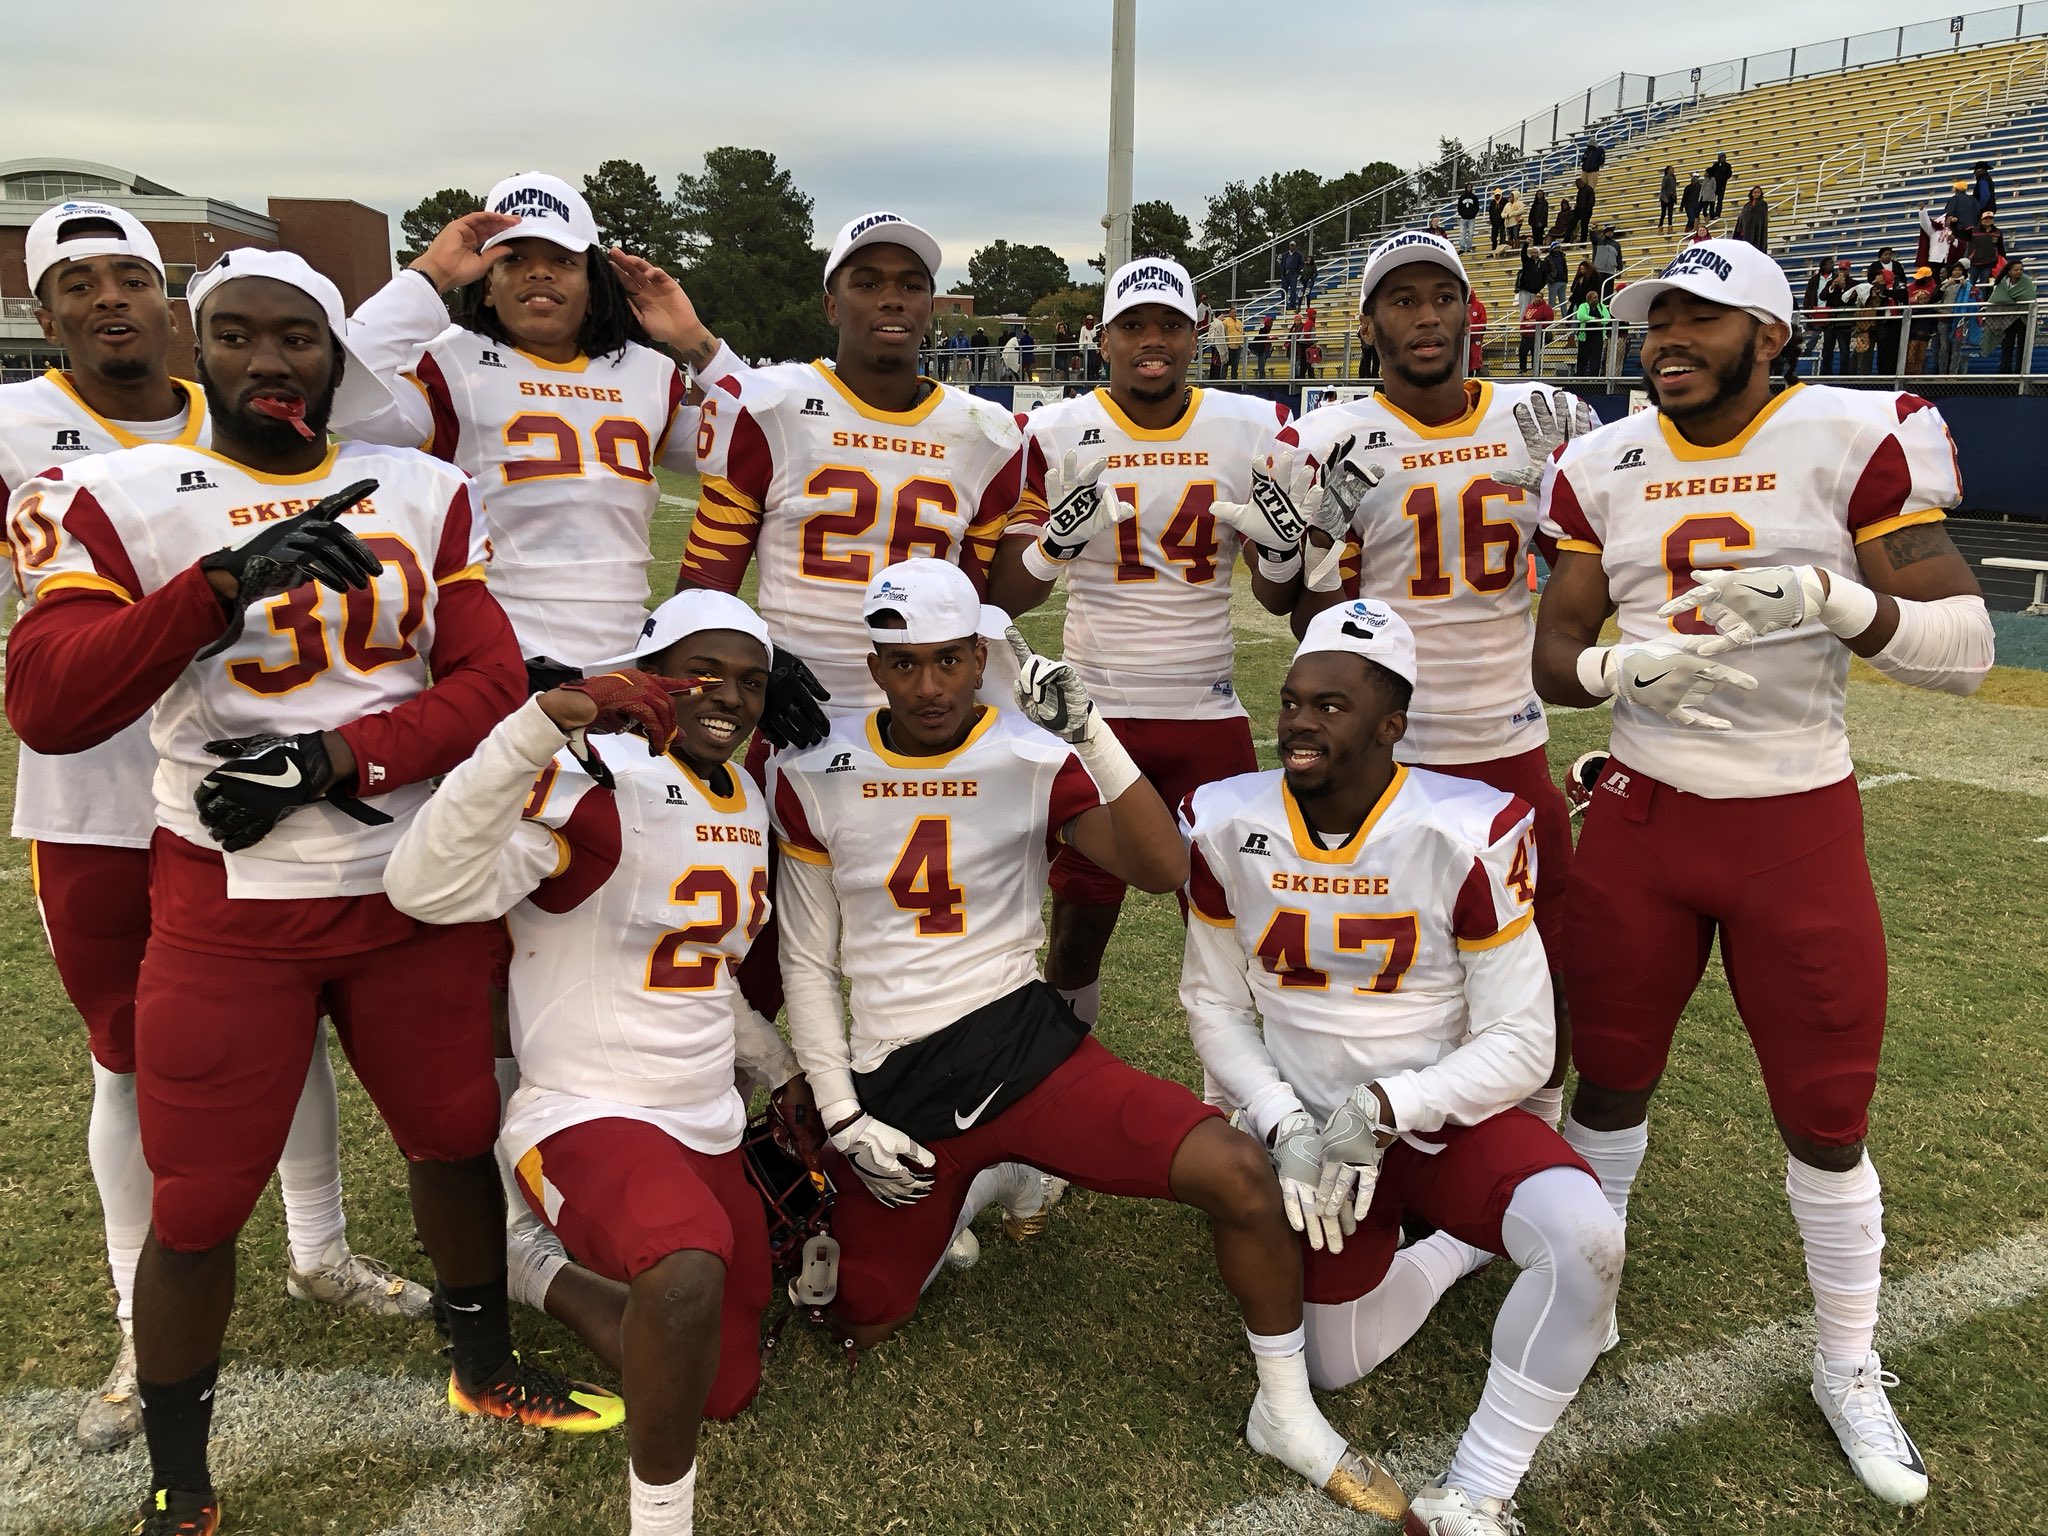 Tuskegee playoffs